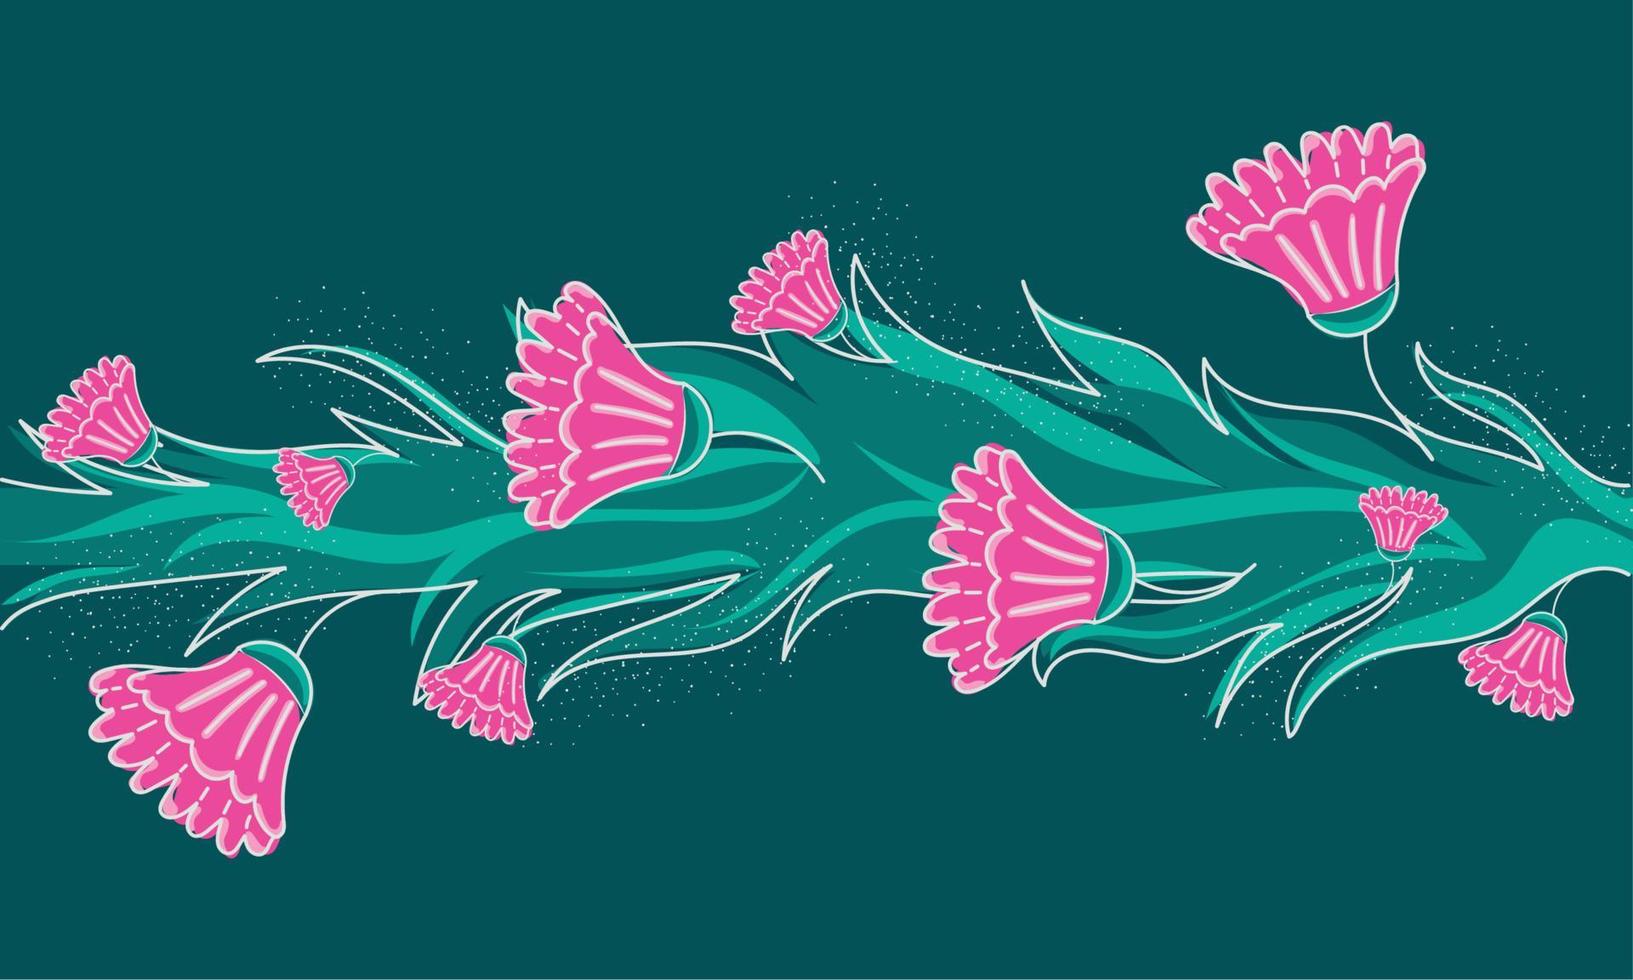 Background of floral banner with pink flowers vector